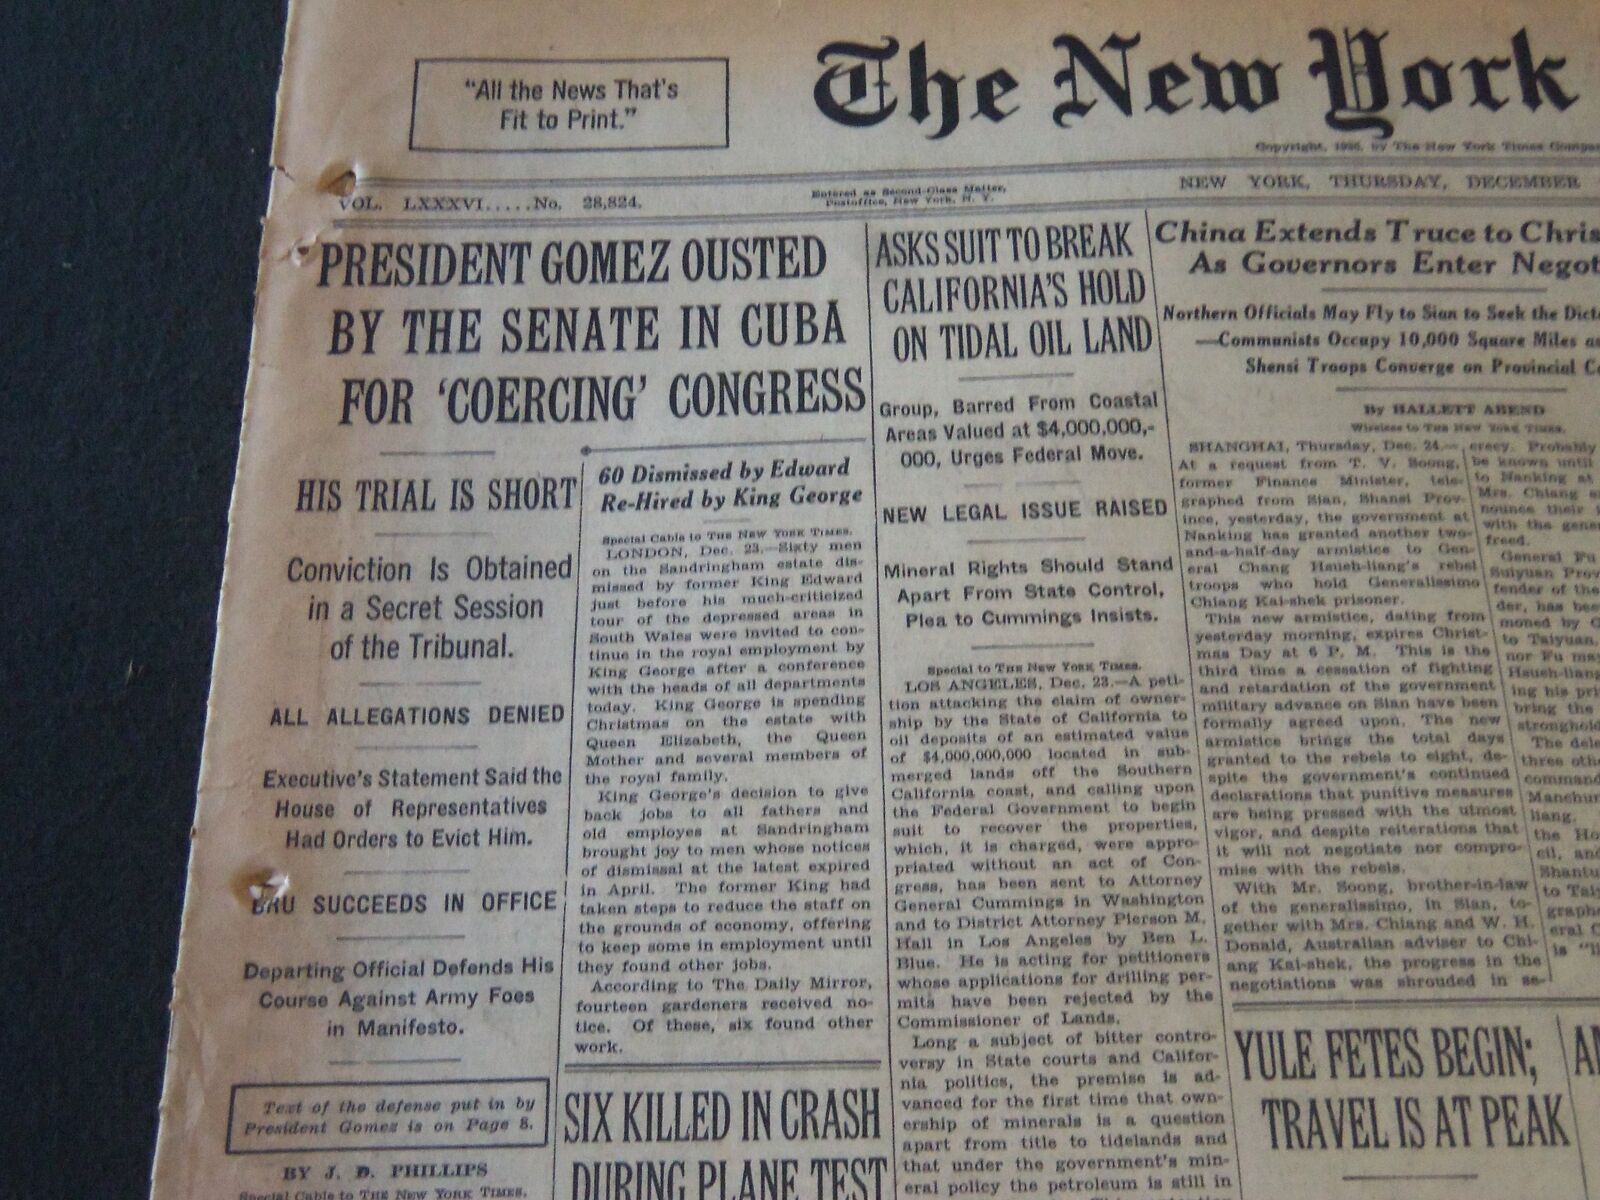 1936 DECEMBER 24 NEW YORK TIMES - PRESIDENT GOMEZ OUSTED IN CUBA - NT 6695